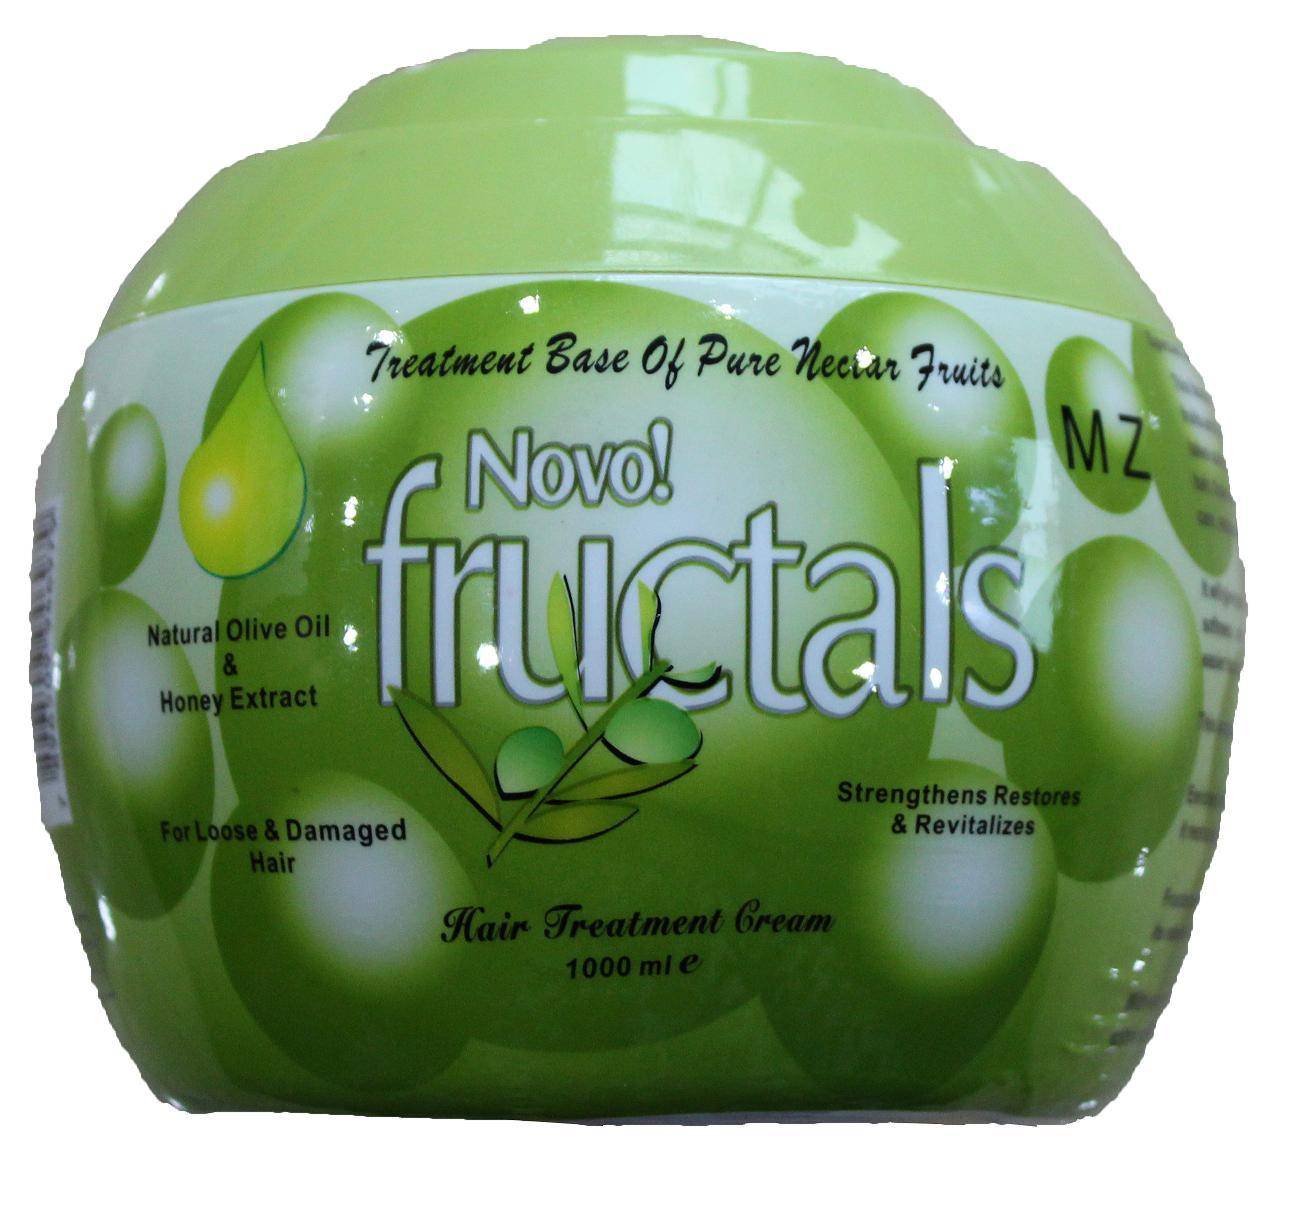 Natural Hair Beauty Treatment Mask Cream with Extract Olive Oil